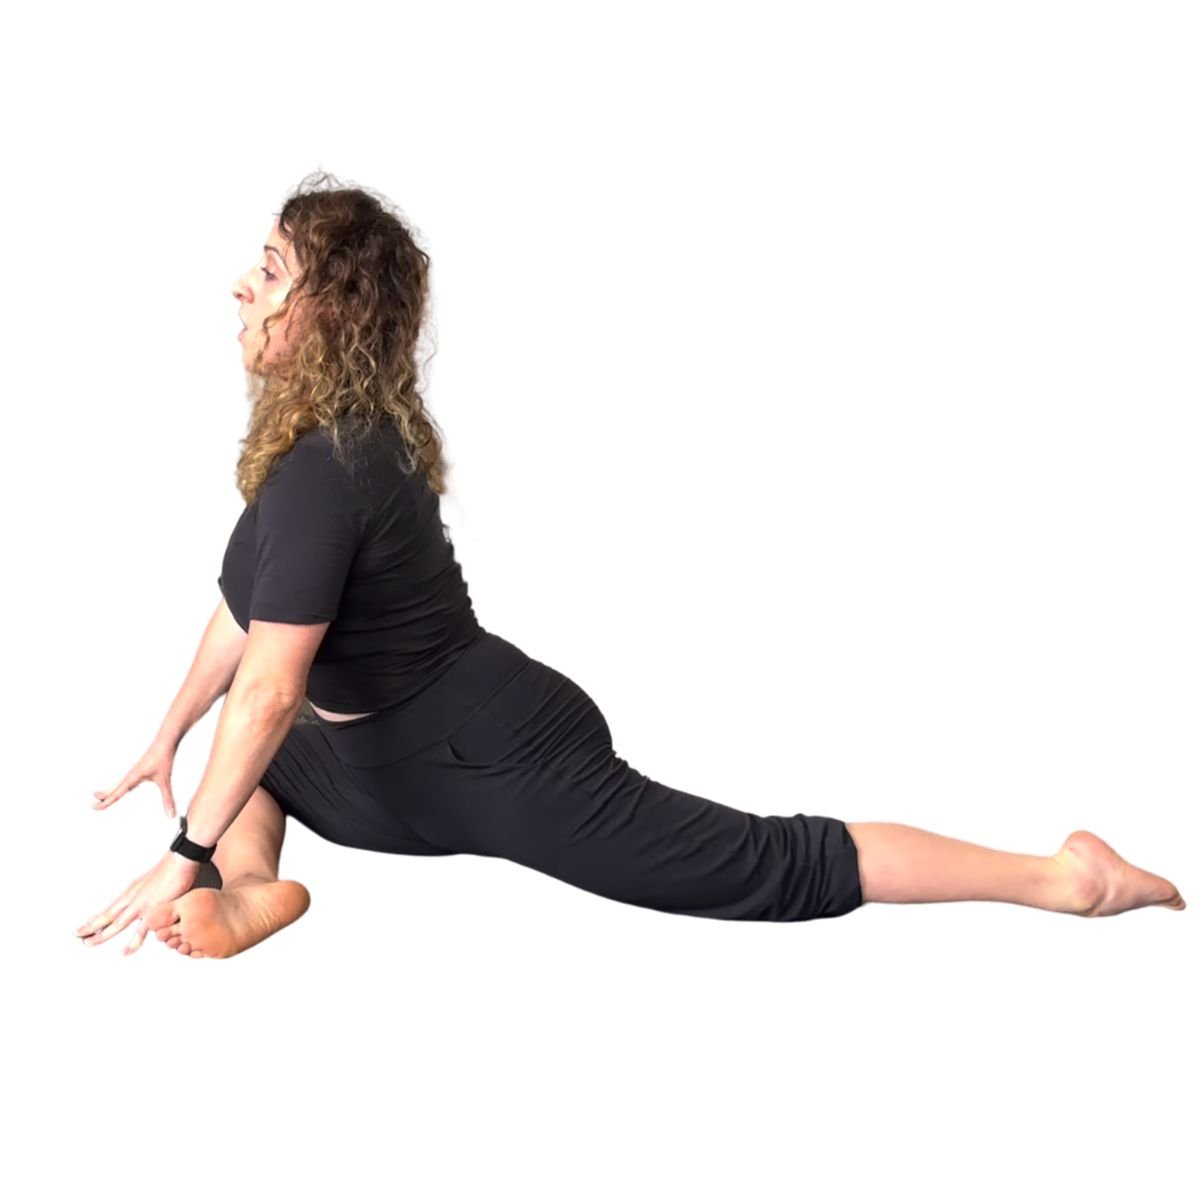 4 Simple Yoga Poses to Relieve Piriformis Syndrome Pain | Spine-health